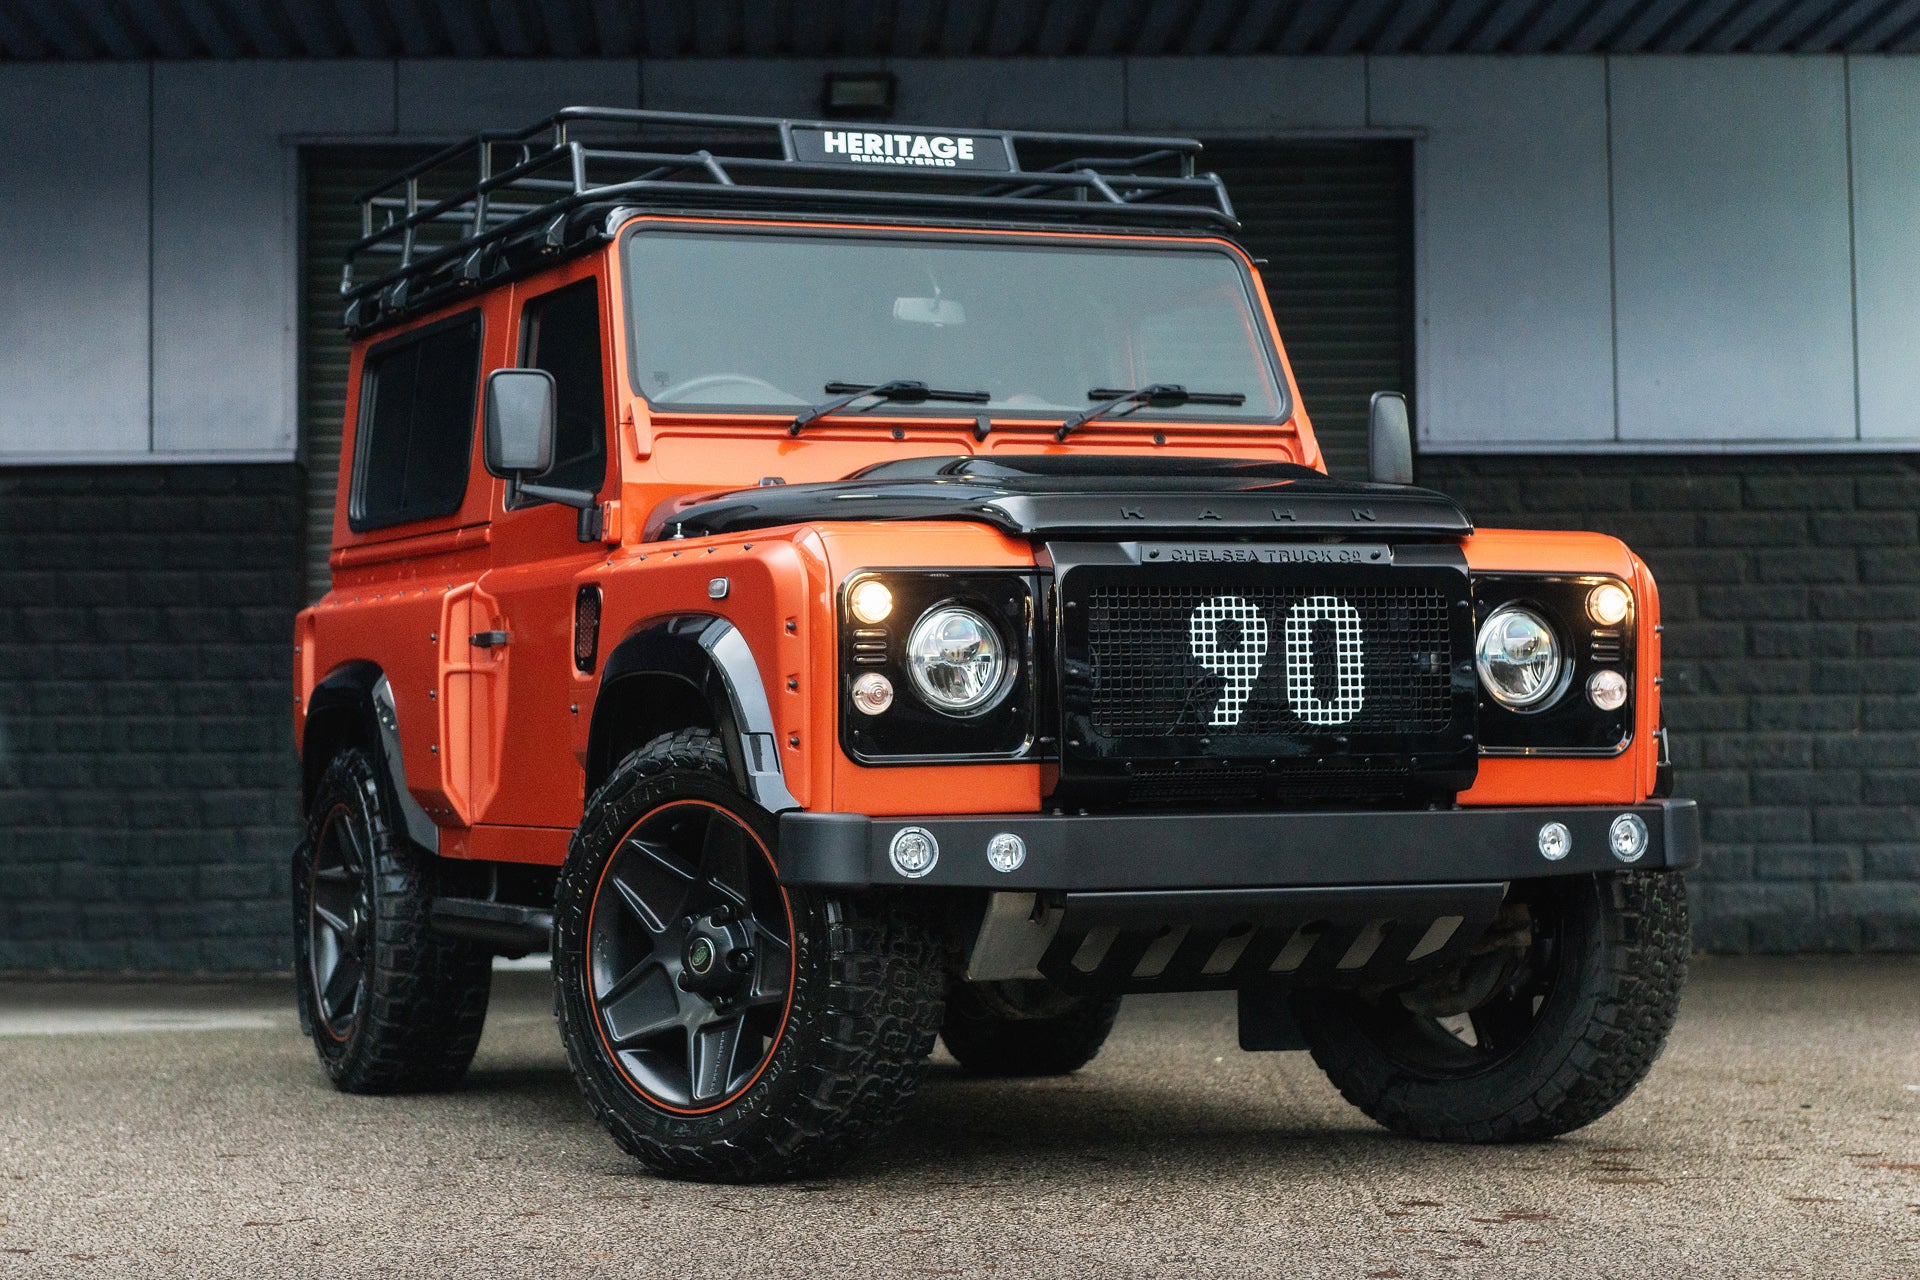 Classic Land Rover Defender 90 Heritage